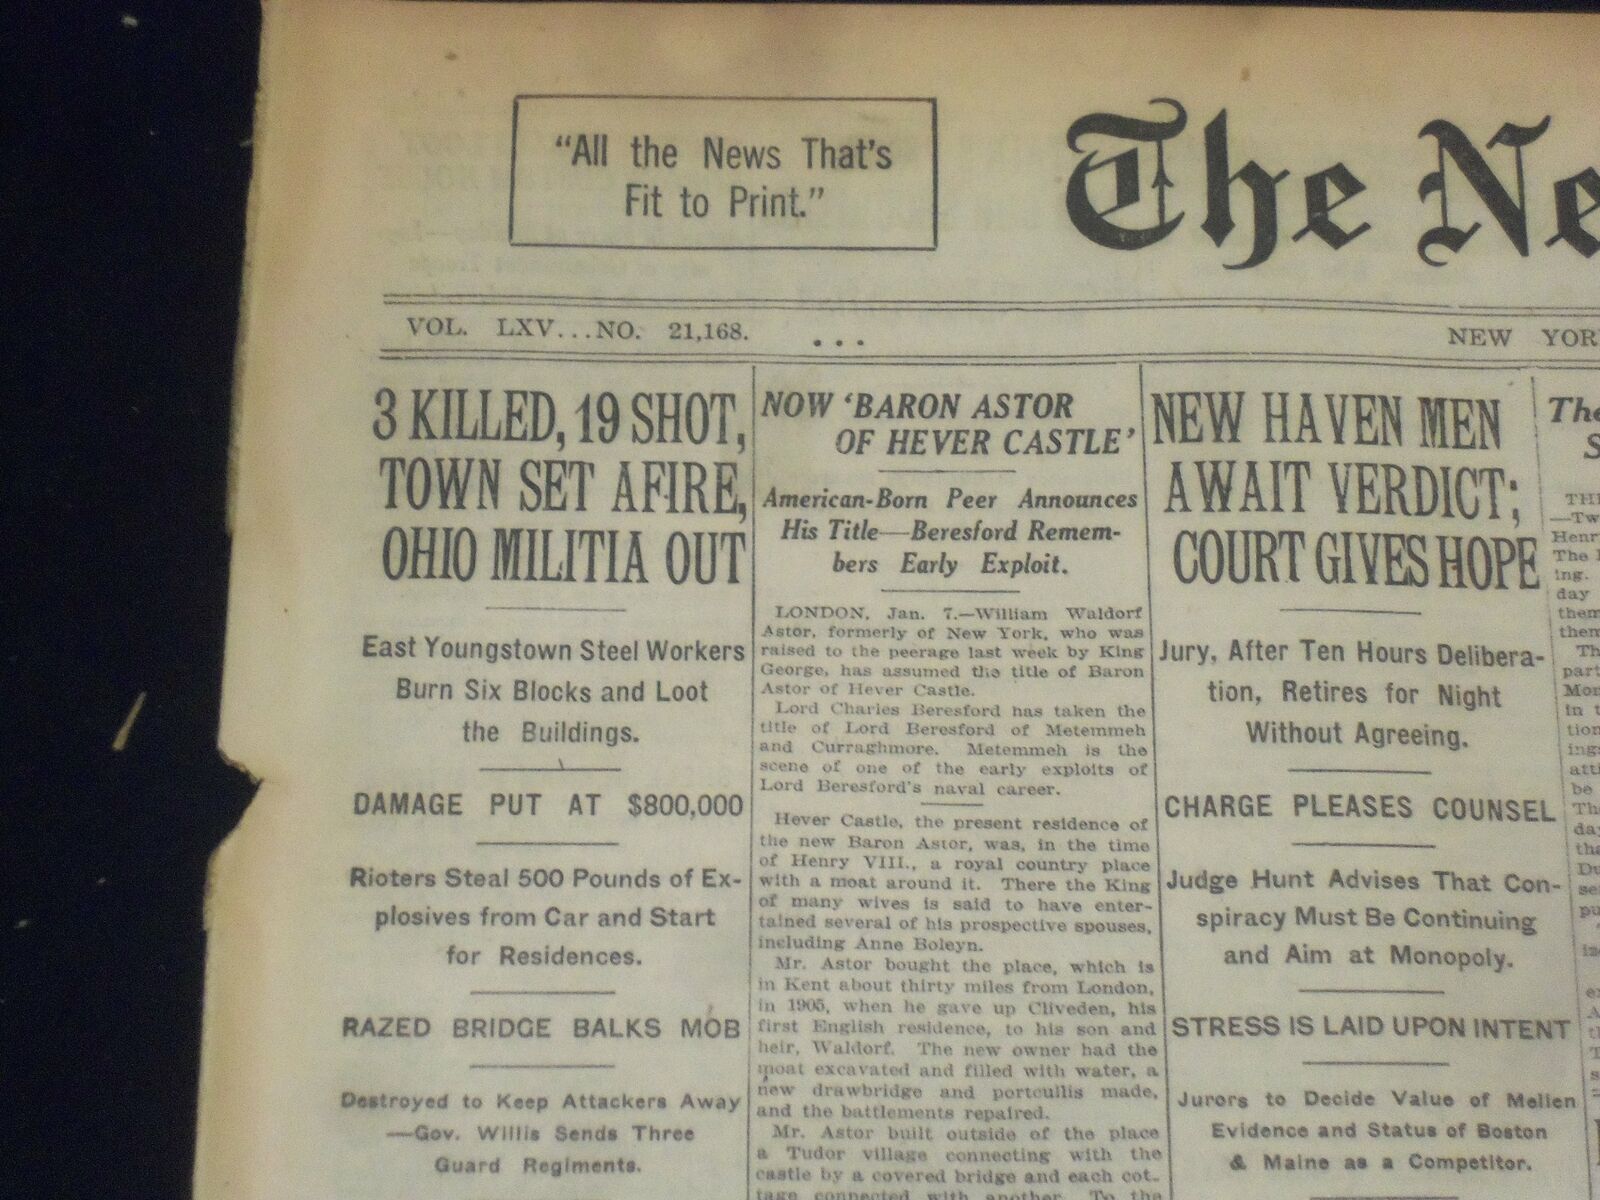 1916 JANUARY 8 NEW YORK TIMES - YOUNGSTOWN SET AFIRE, 3 KILLED - NT 9055